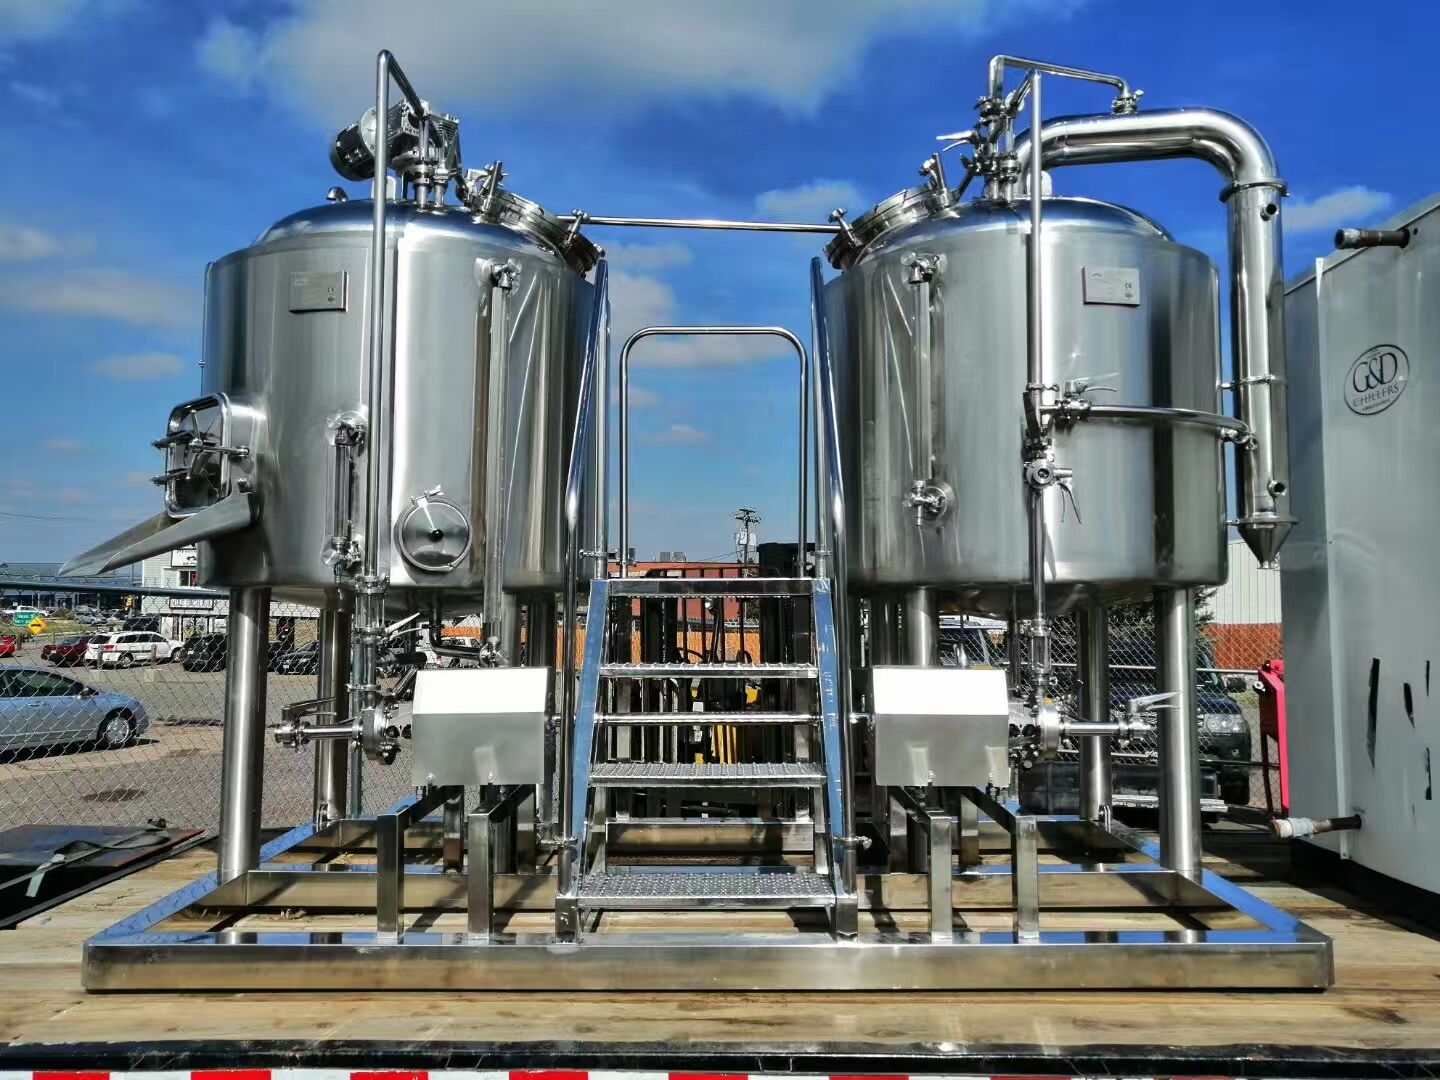 5bbl brewhousebeer brewery equipment for sale